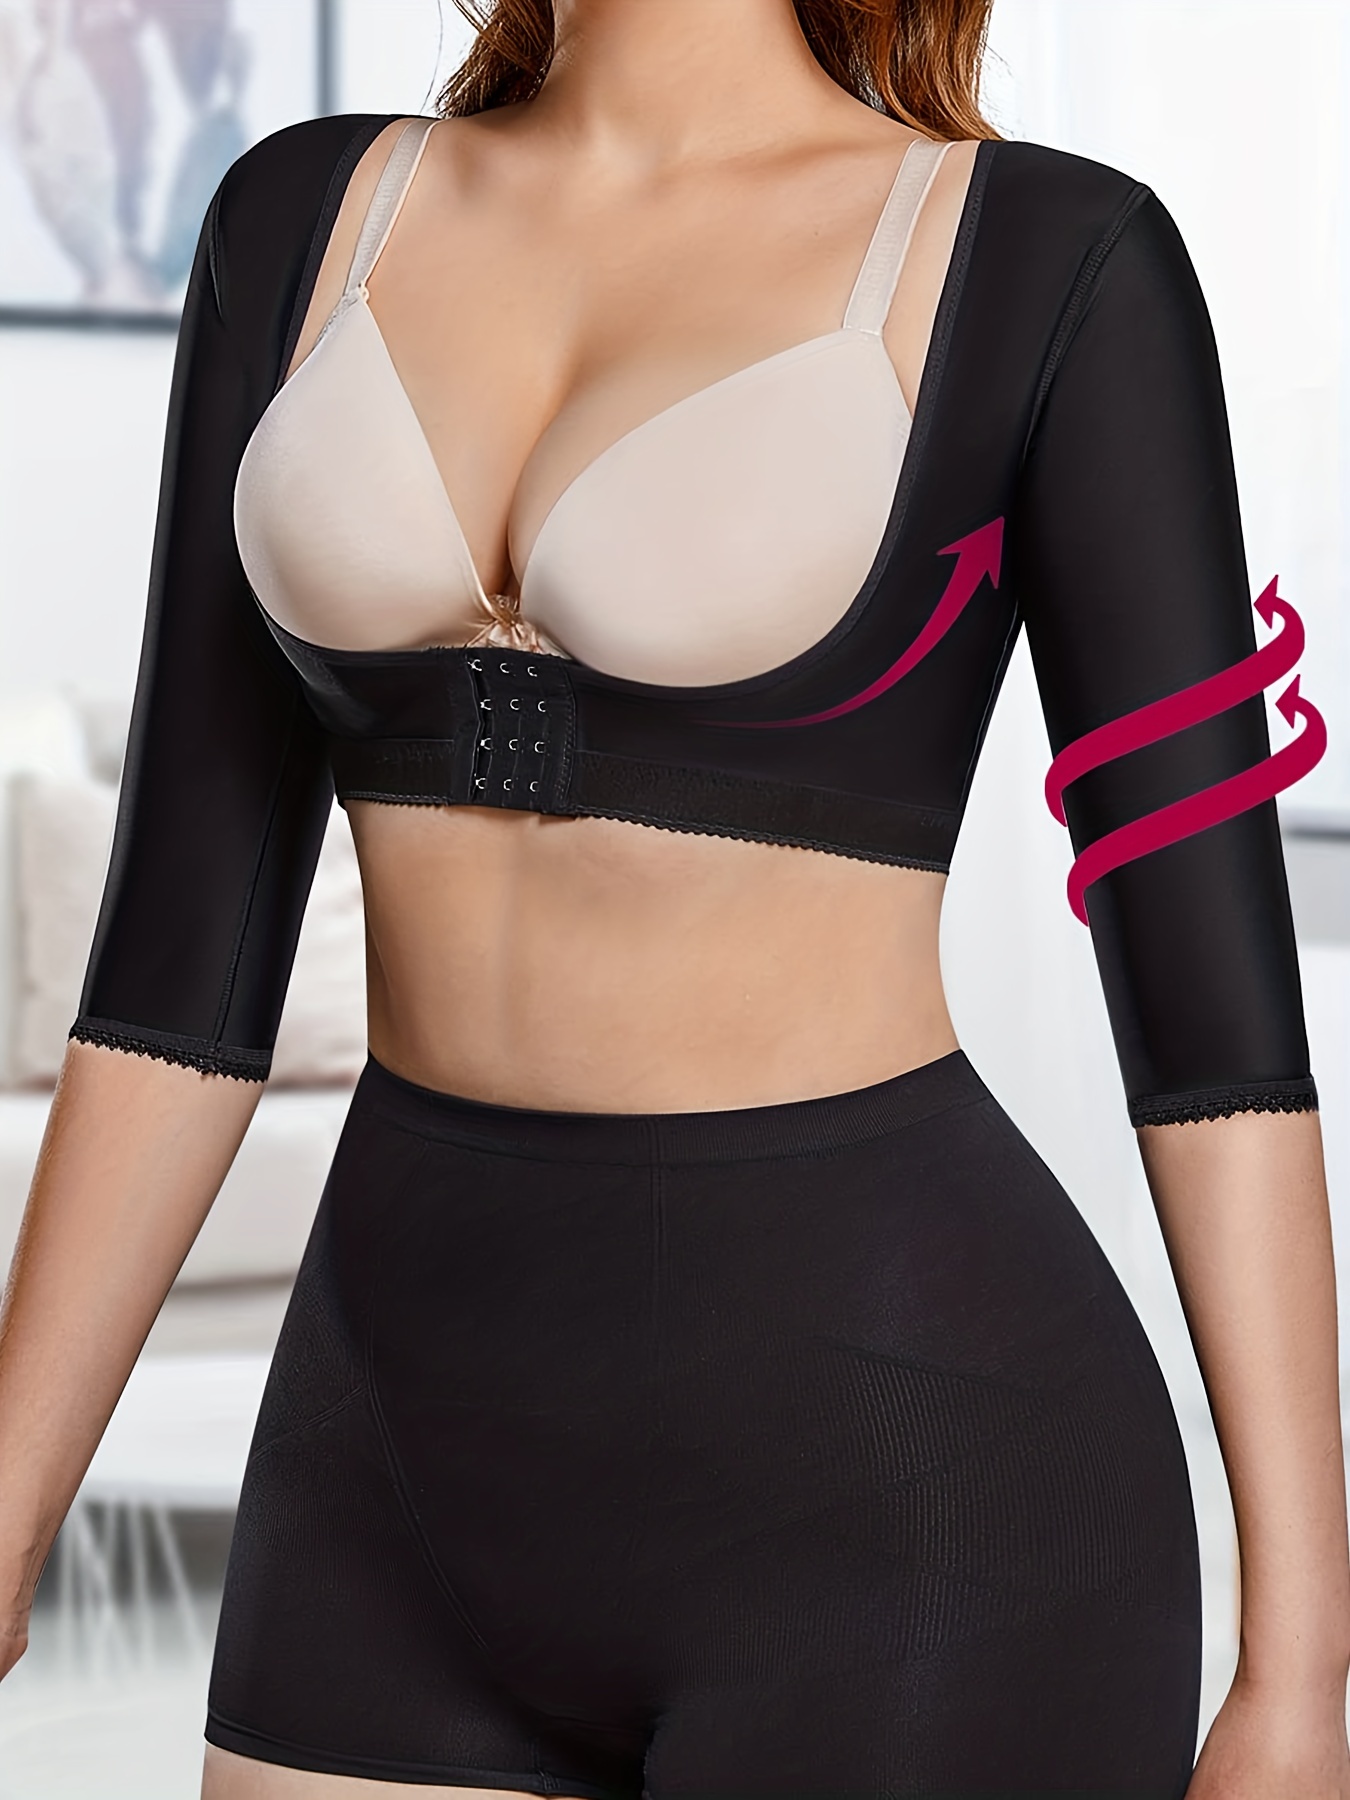 Women Upper Arm Shaper Body Compression Sleeves Post Surgical Slimmer  Humpback Posture Corrector Tops Shapewear -  Canada